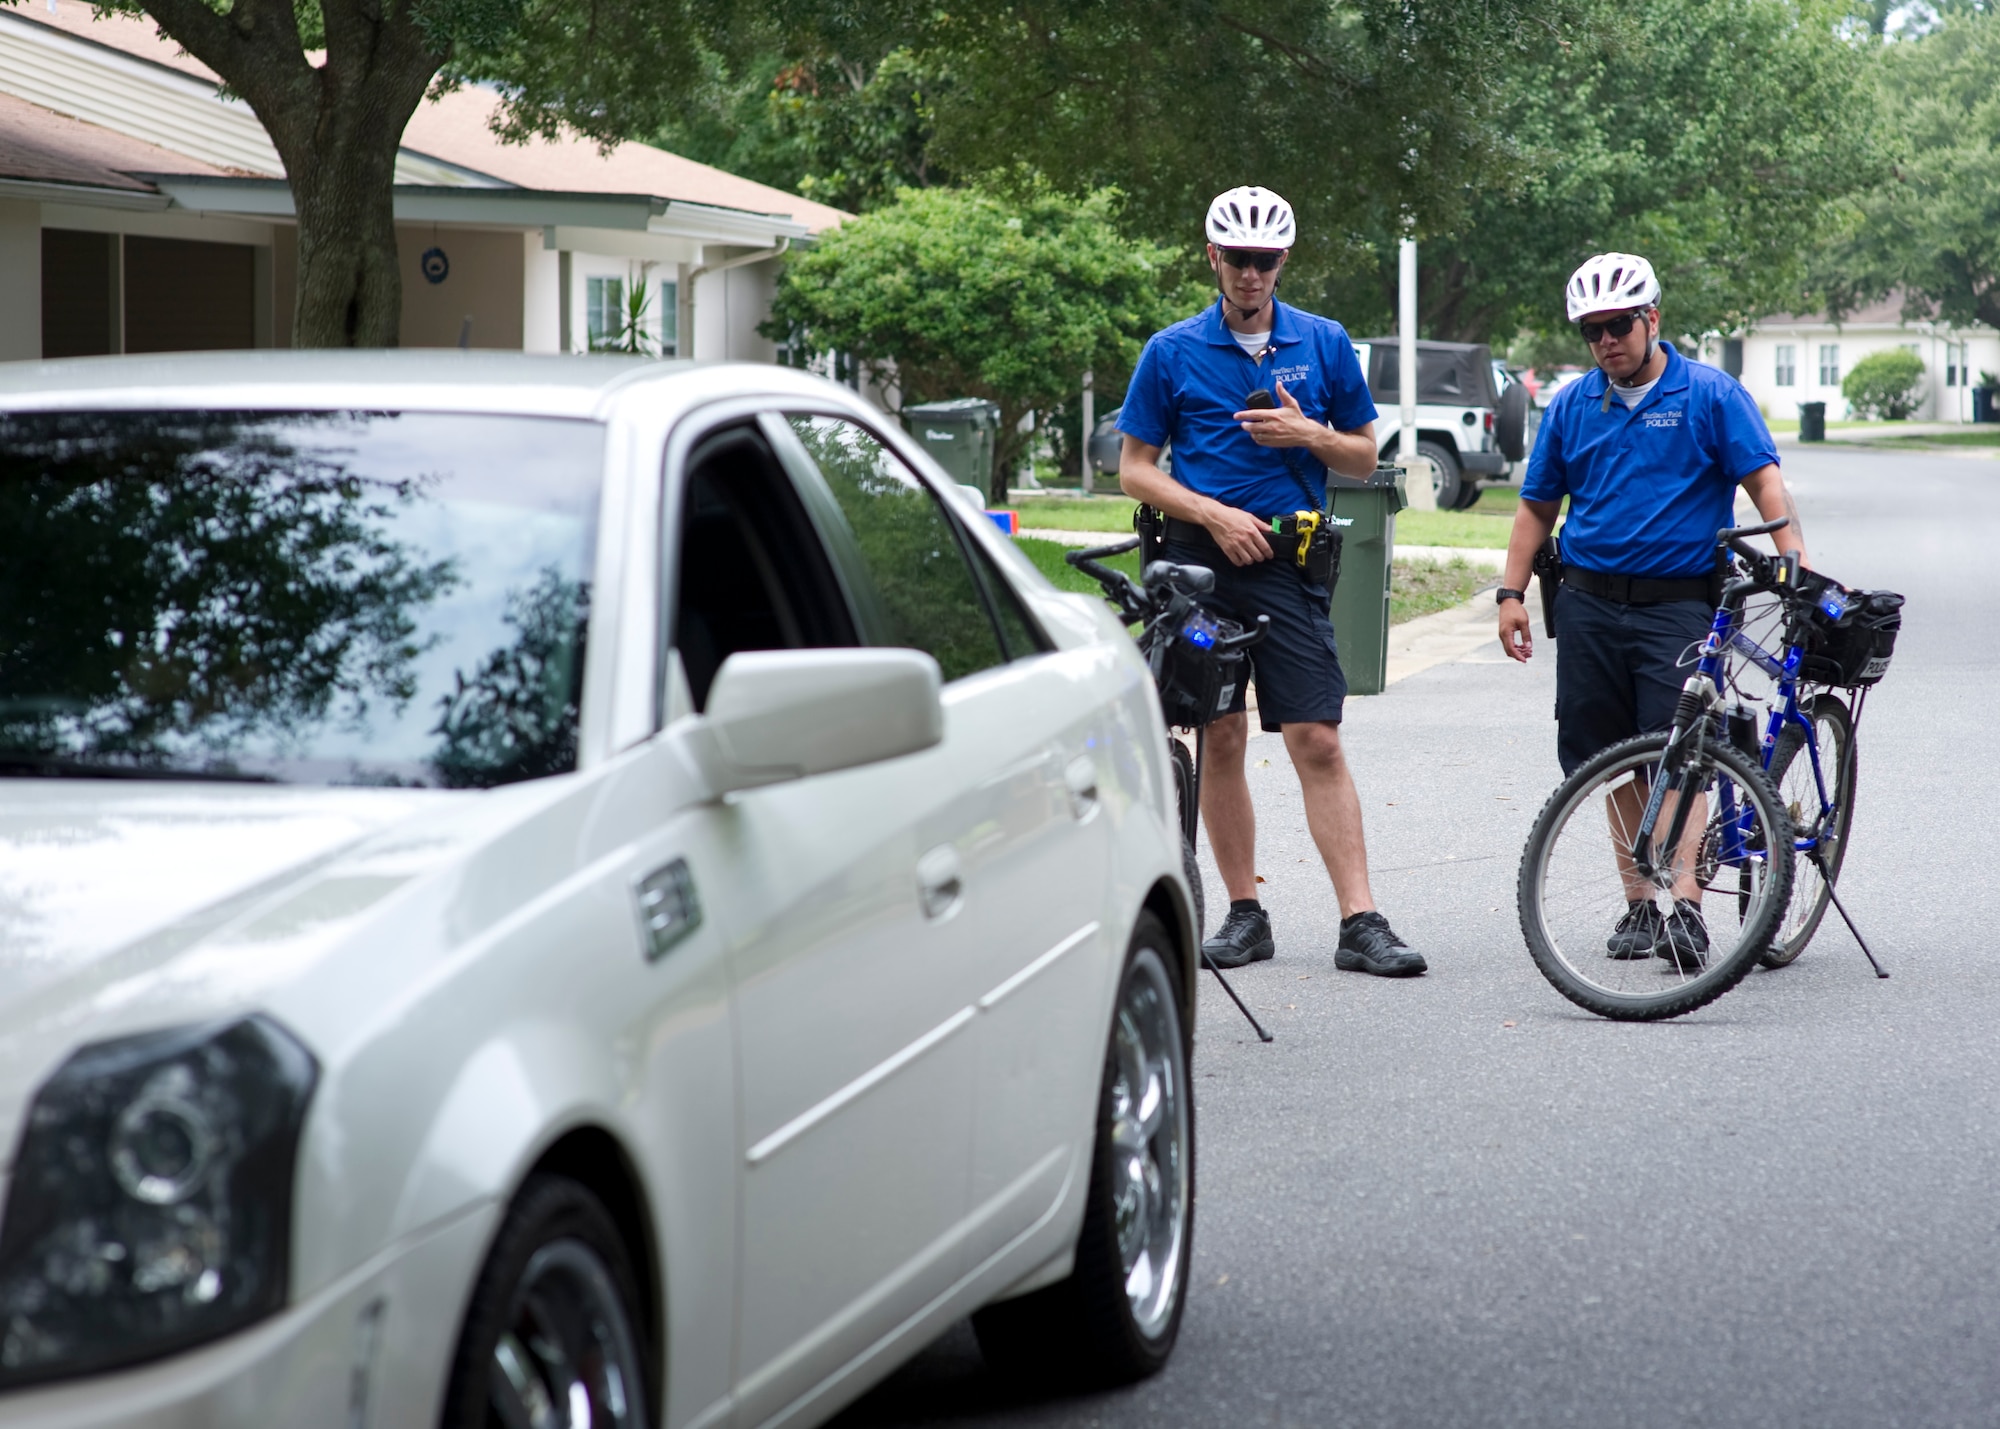 Airman 1st Class Gary Jackson and Senior Airman Pablo Uribe, bike patrolmen with 1st Special Operations Security Forces Squadron, perform a traffic stop in base housing on Hurlburt Field, Fla. July 24, 2013. The bike patrols perform the same duties and responsibilities as other vehicle based patrol units. 
(U.S. Air Force Photo/ Staff Sgt. John Bainter)
